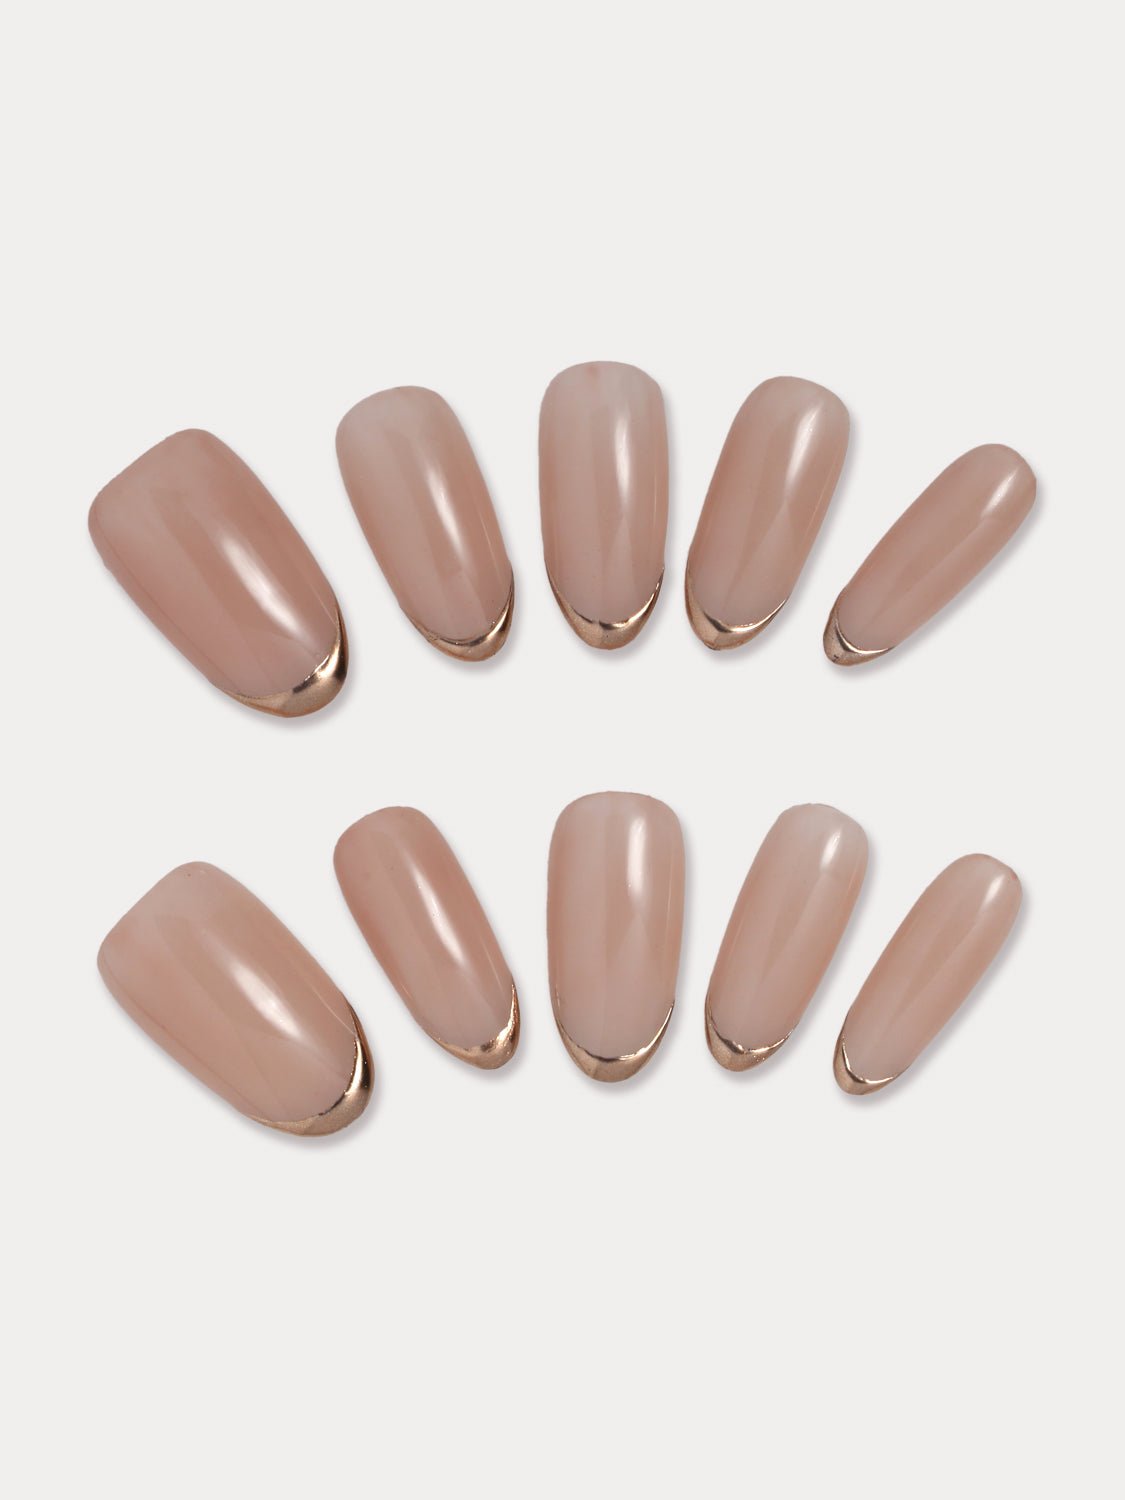 MIEAP Chrome Powder French Tip press on nail set features a metallic French tip created with gold chrome powder, adding a touch of sophistication to your nails. The combination of the chrome powder and nude nail gel creates a unique and stylish design. The oval nail shape help elongate the fingers, enhancing their overall appearance. #MIEAP #MIEAPnails #pressonnail #falsenail #acrylicnail #nails #nailart #naildesign #nailinspo #handmadenail #summernail #nail2023 #graduationnail #classicnail